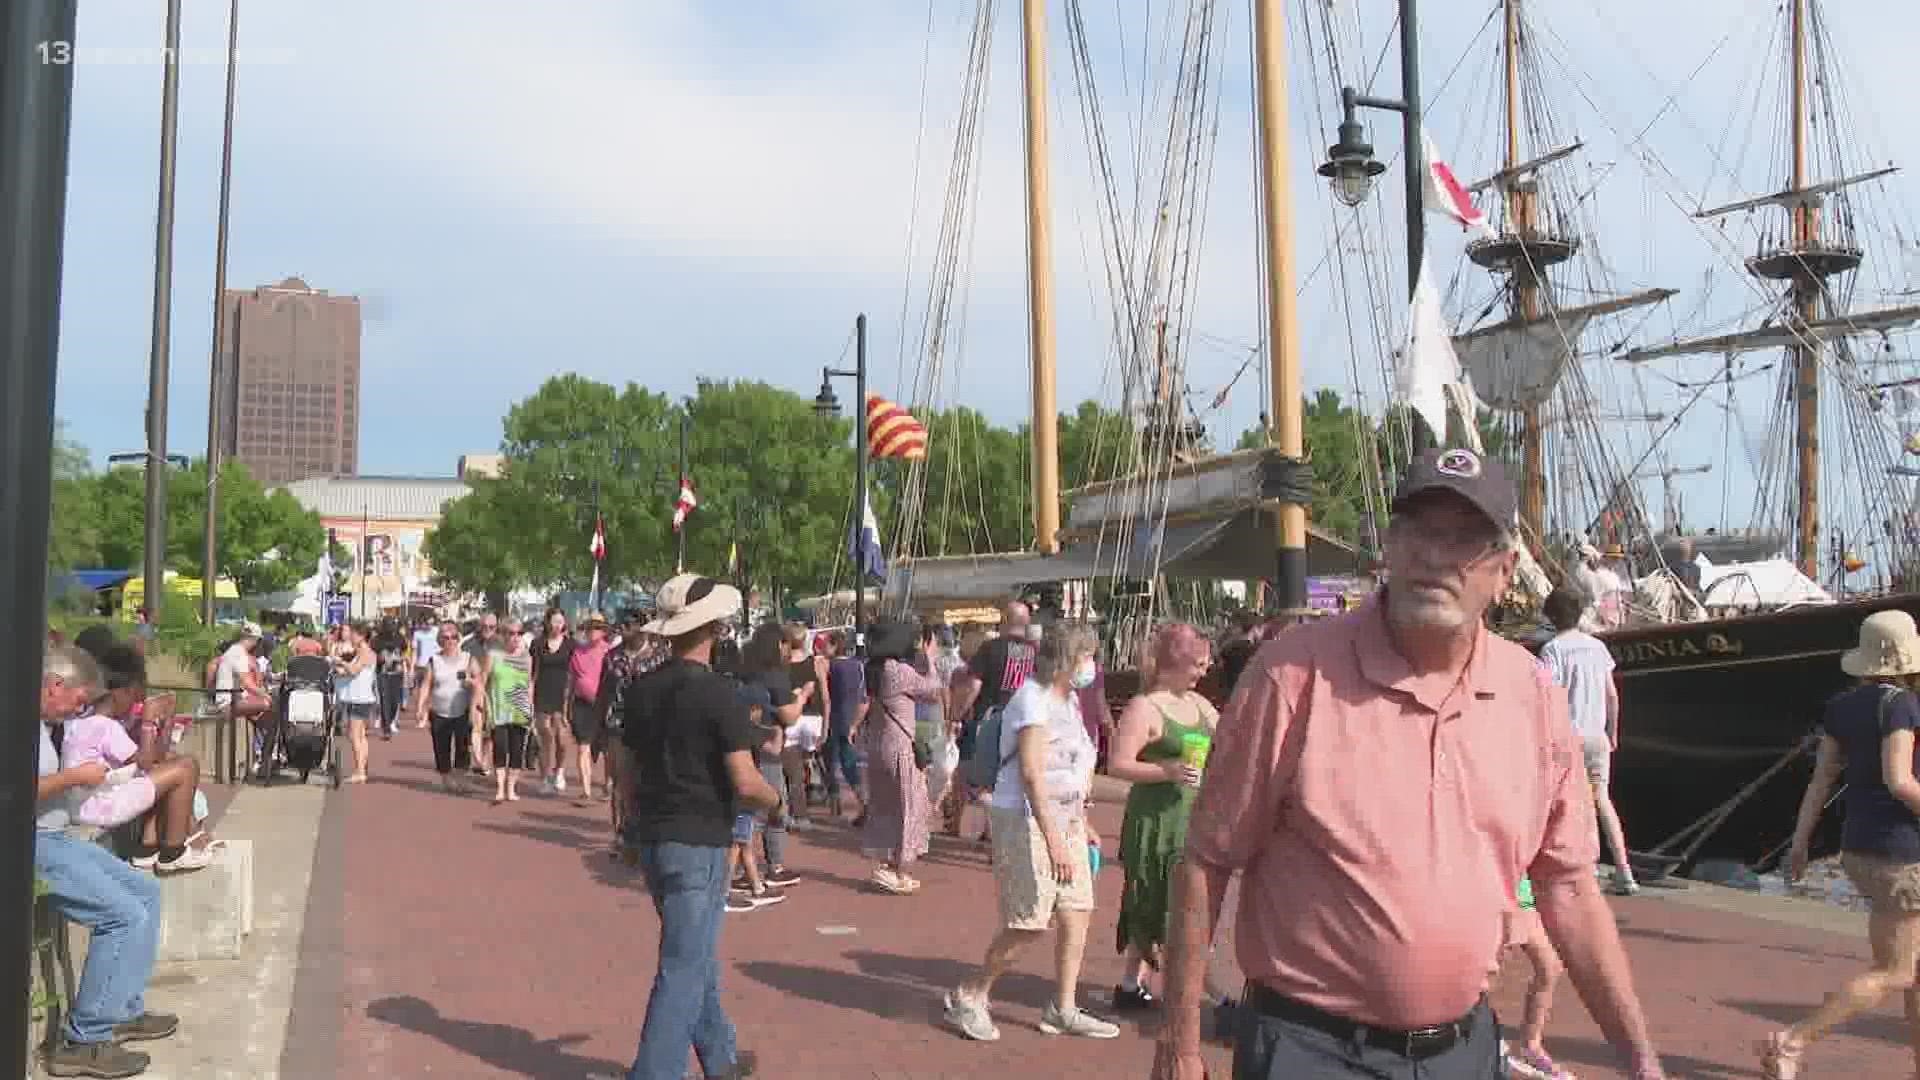 A longtime tradition in the Mermaid City is back this weekend for thousands to enjoy.